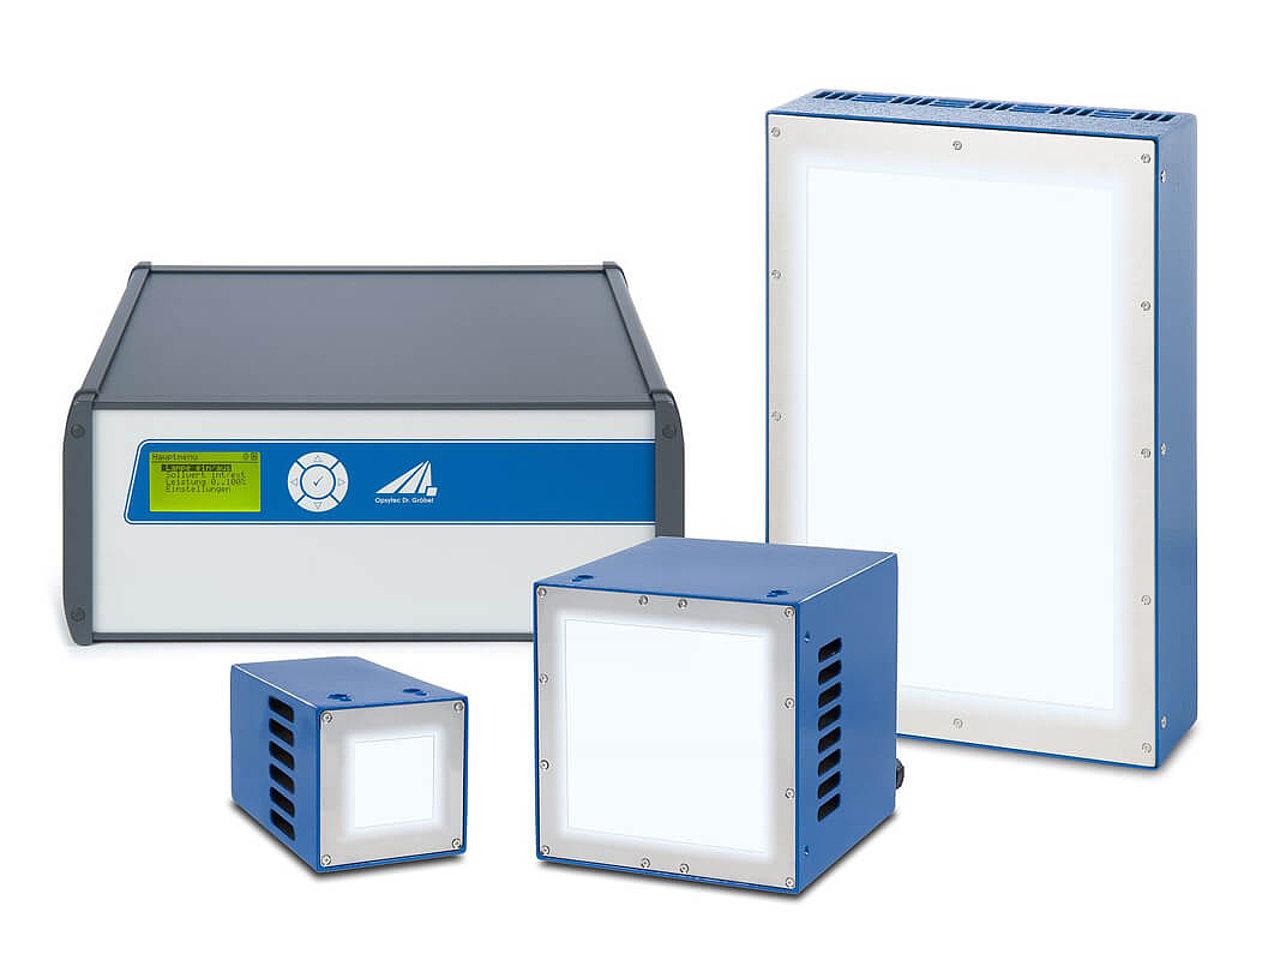 Air-cooled UV-LED light source with up to 8W/cm²